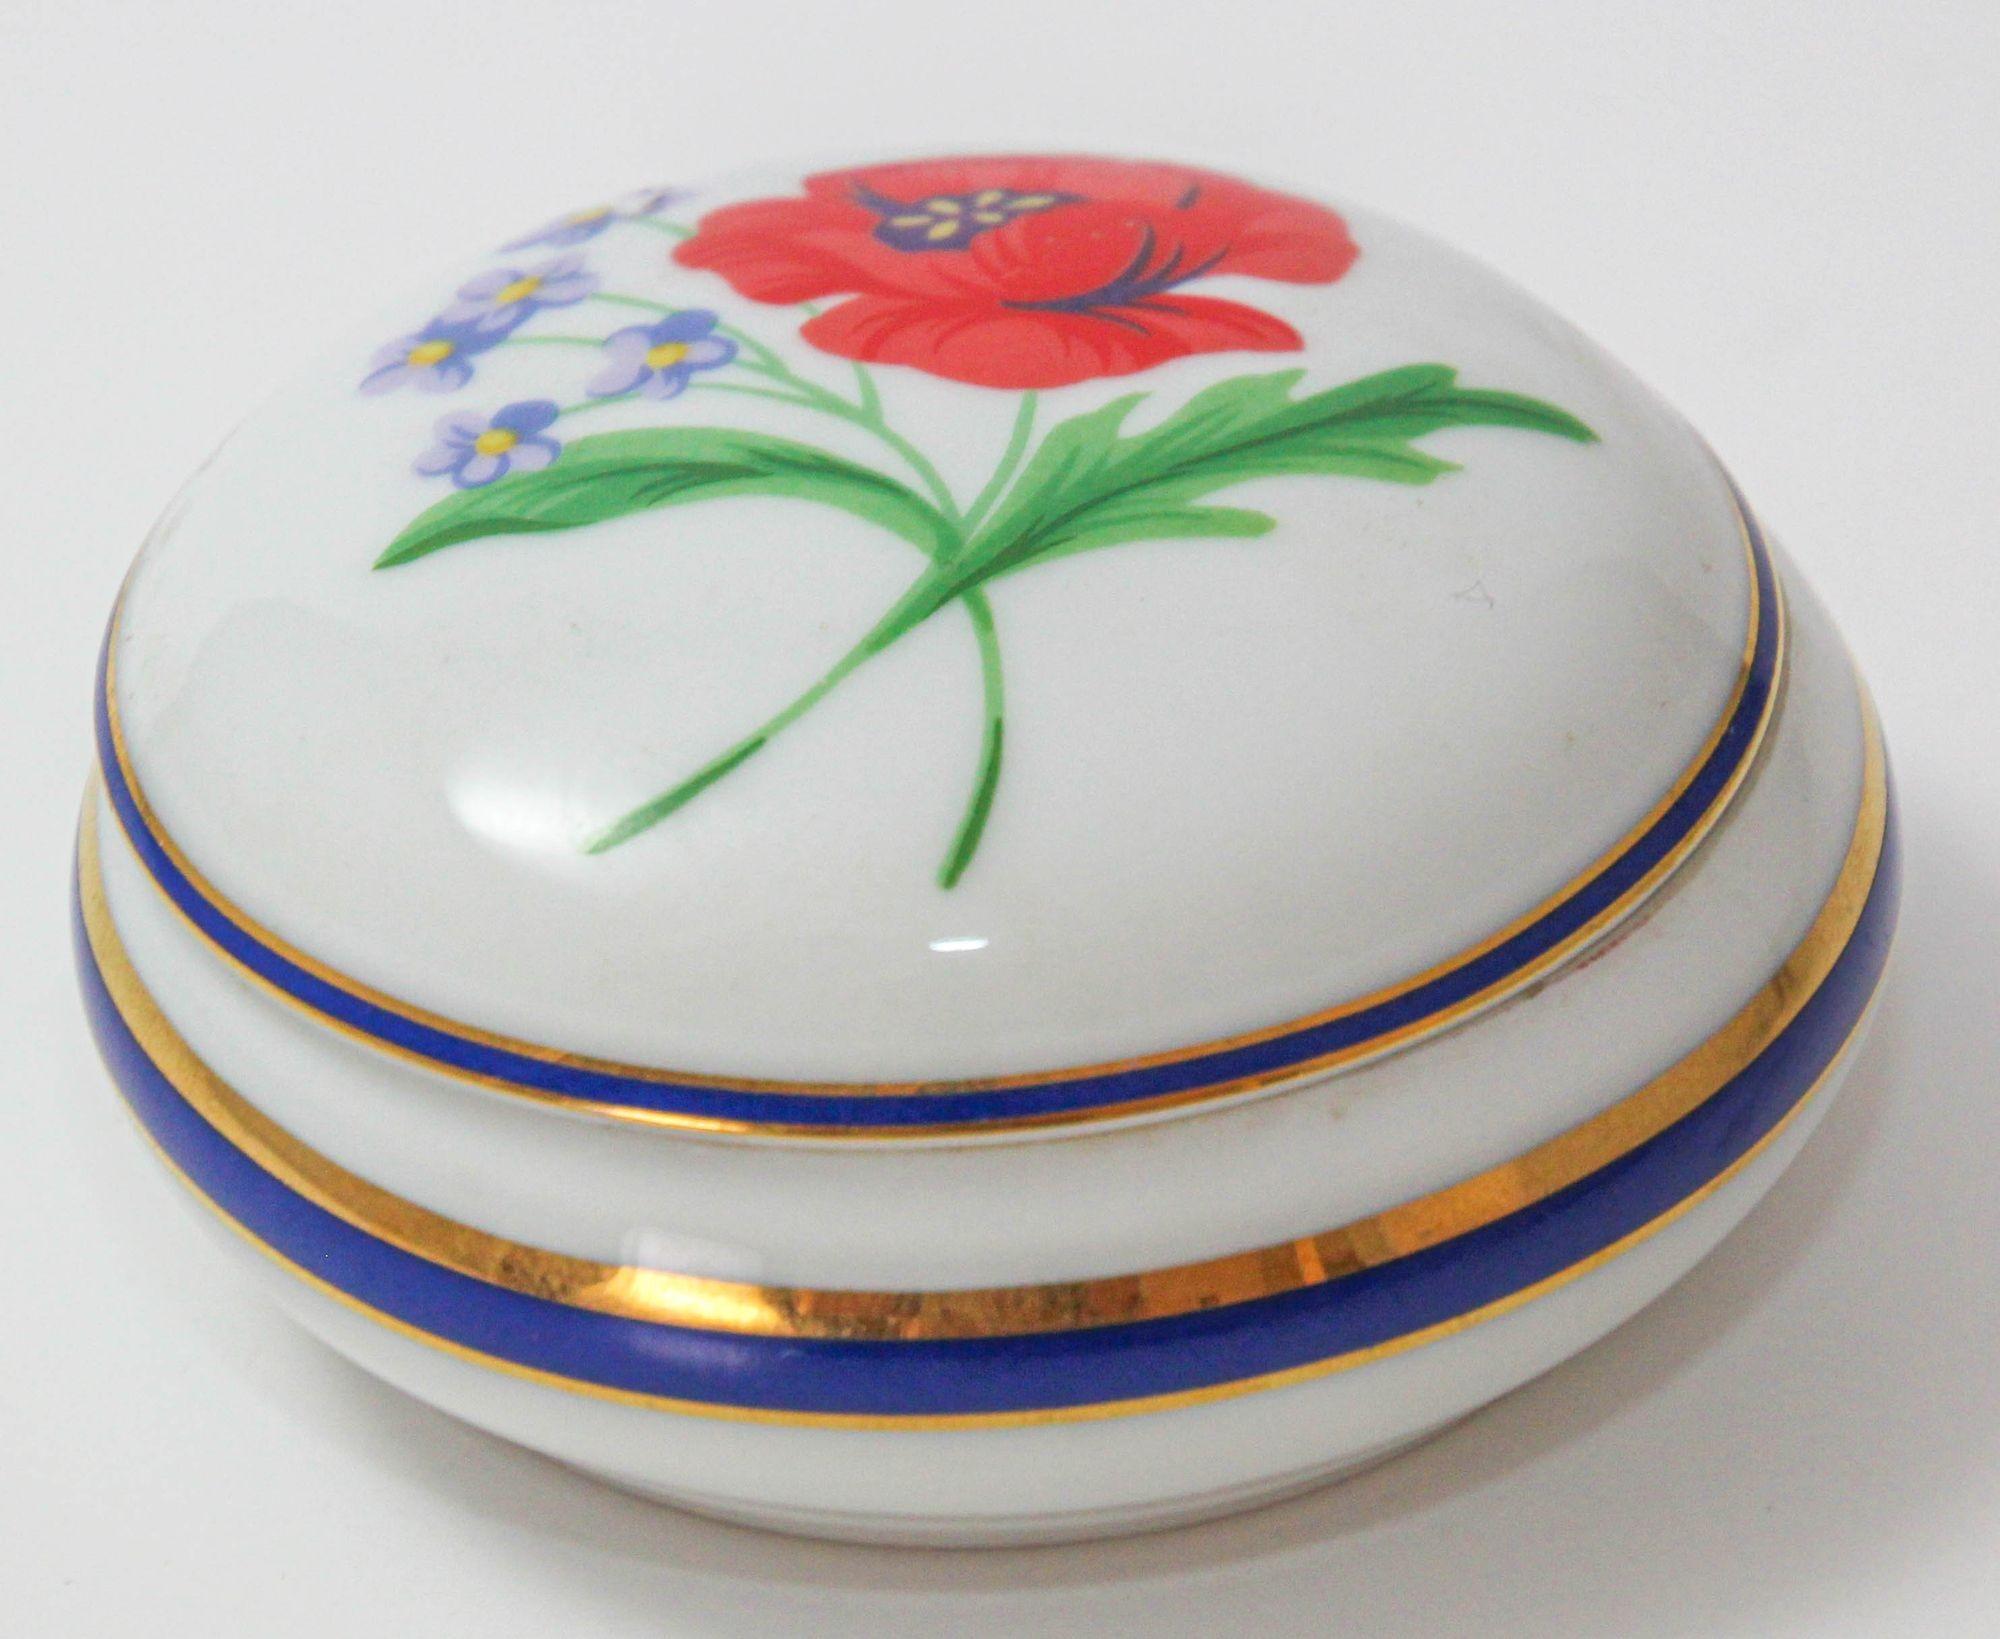 Tiffany & Co. Limoges France American Garden Round Porcelain Collectible Box In Good Condition For Sale In North Hollywood, CA